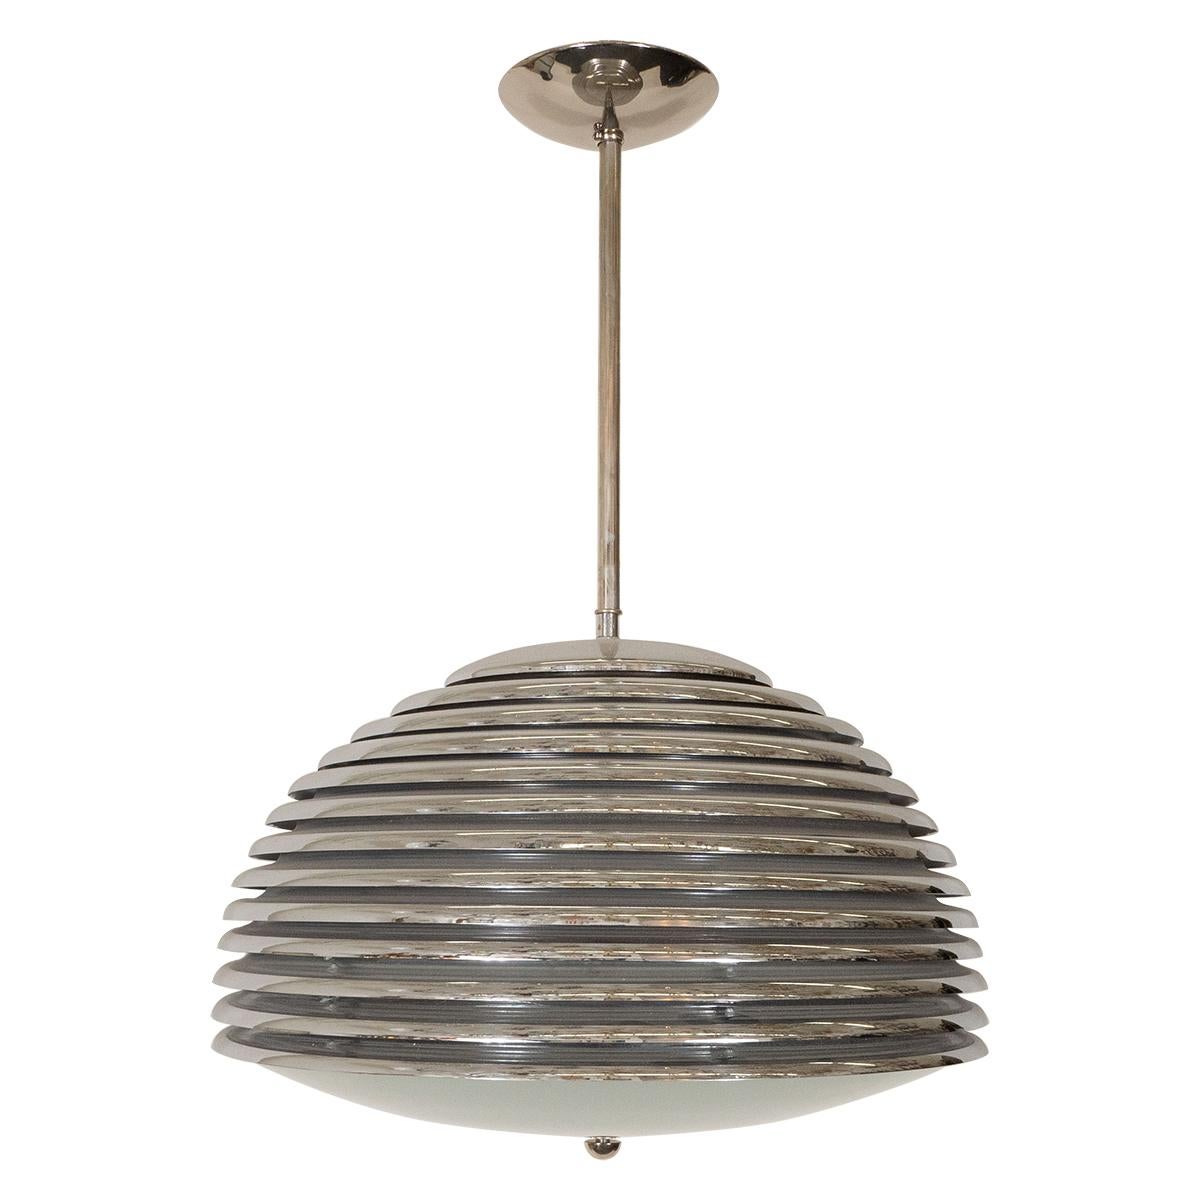 Space-age polished nickel pendant with frosted glass shade.